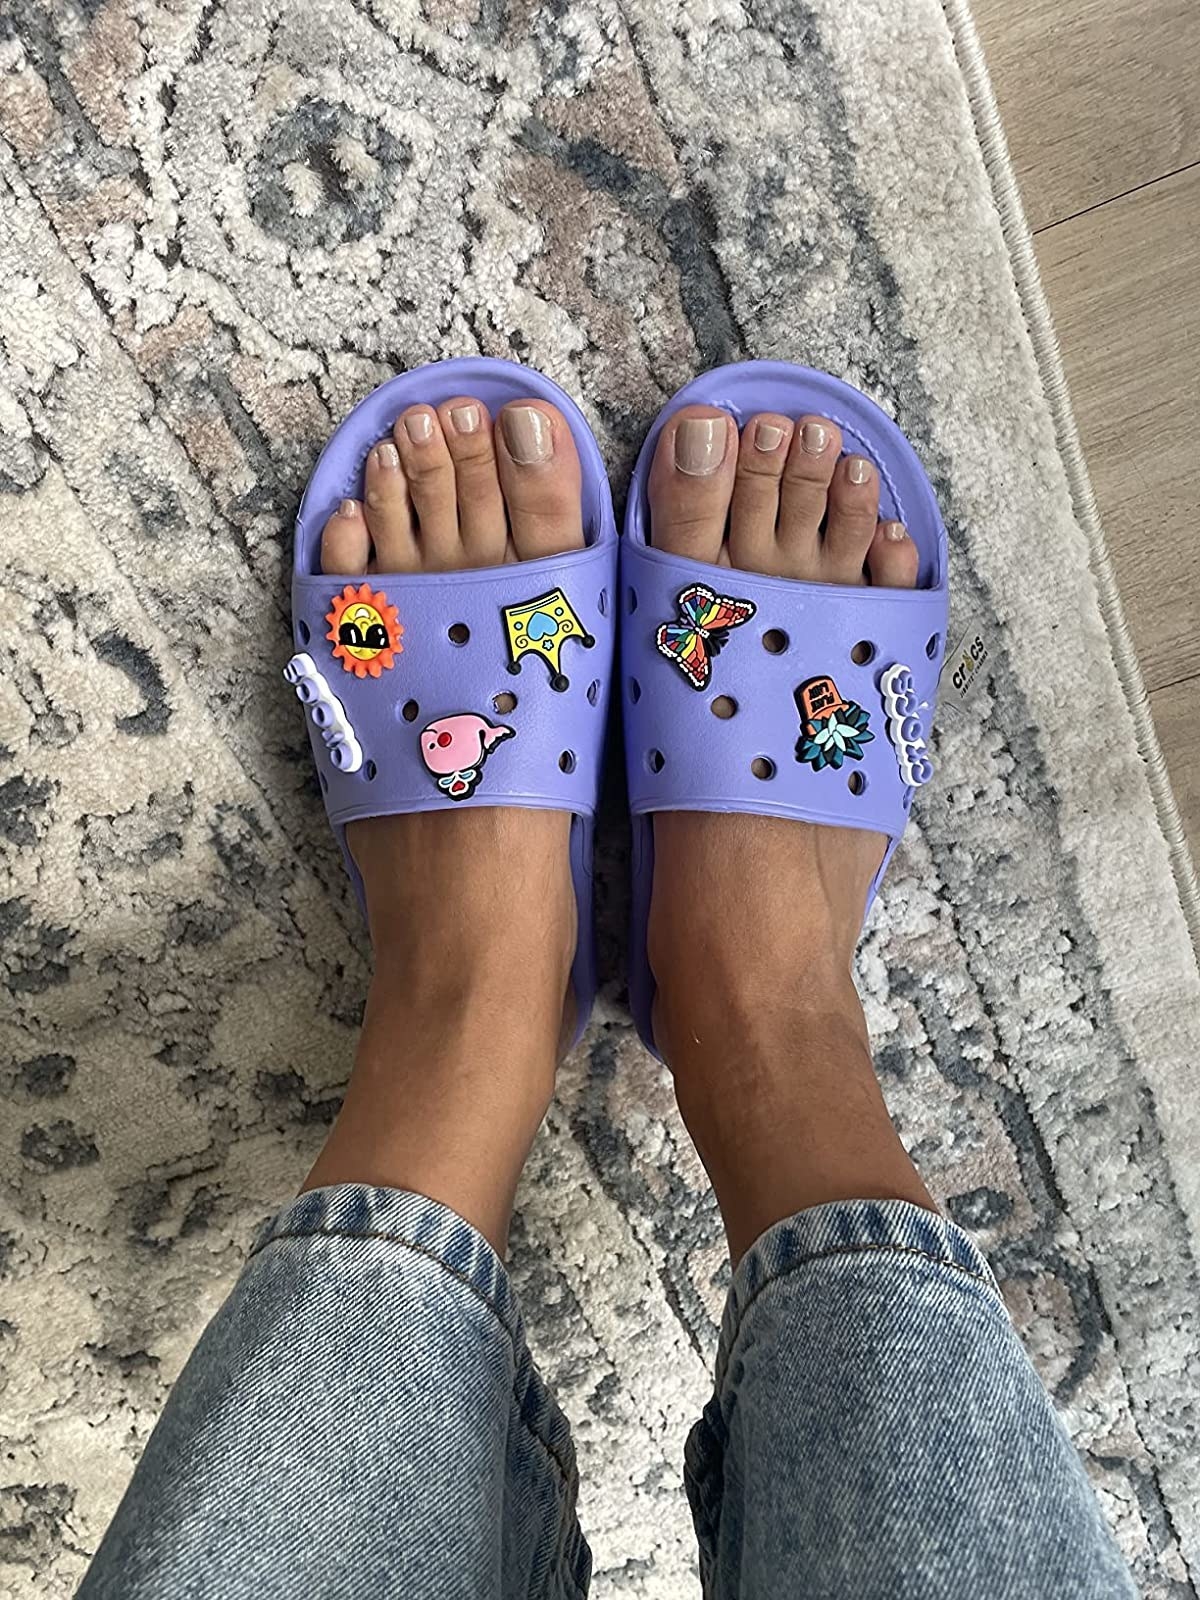 reviewer wearing the slides in color digital purple